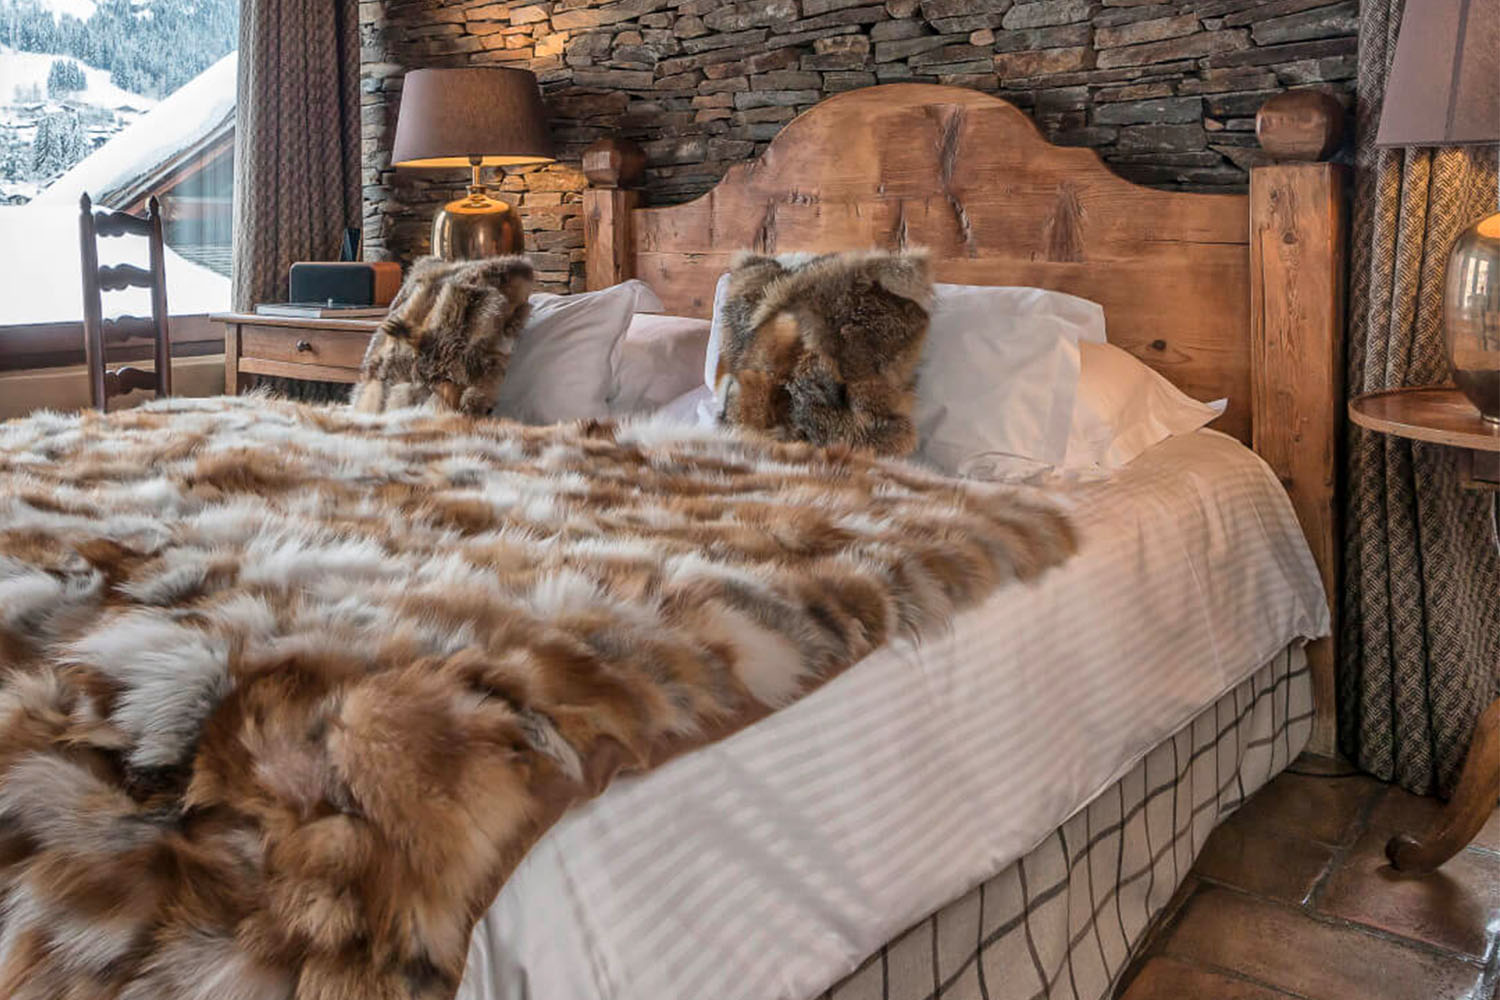 Room in a cabin with bed and furry blanket and pillows